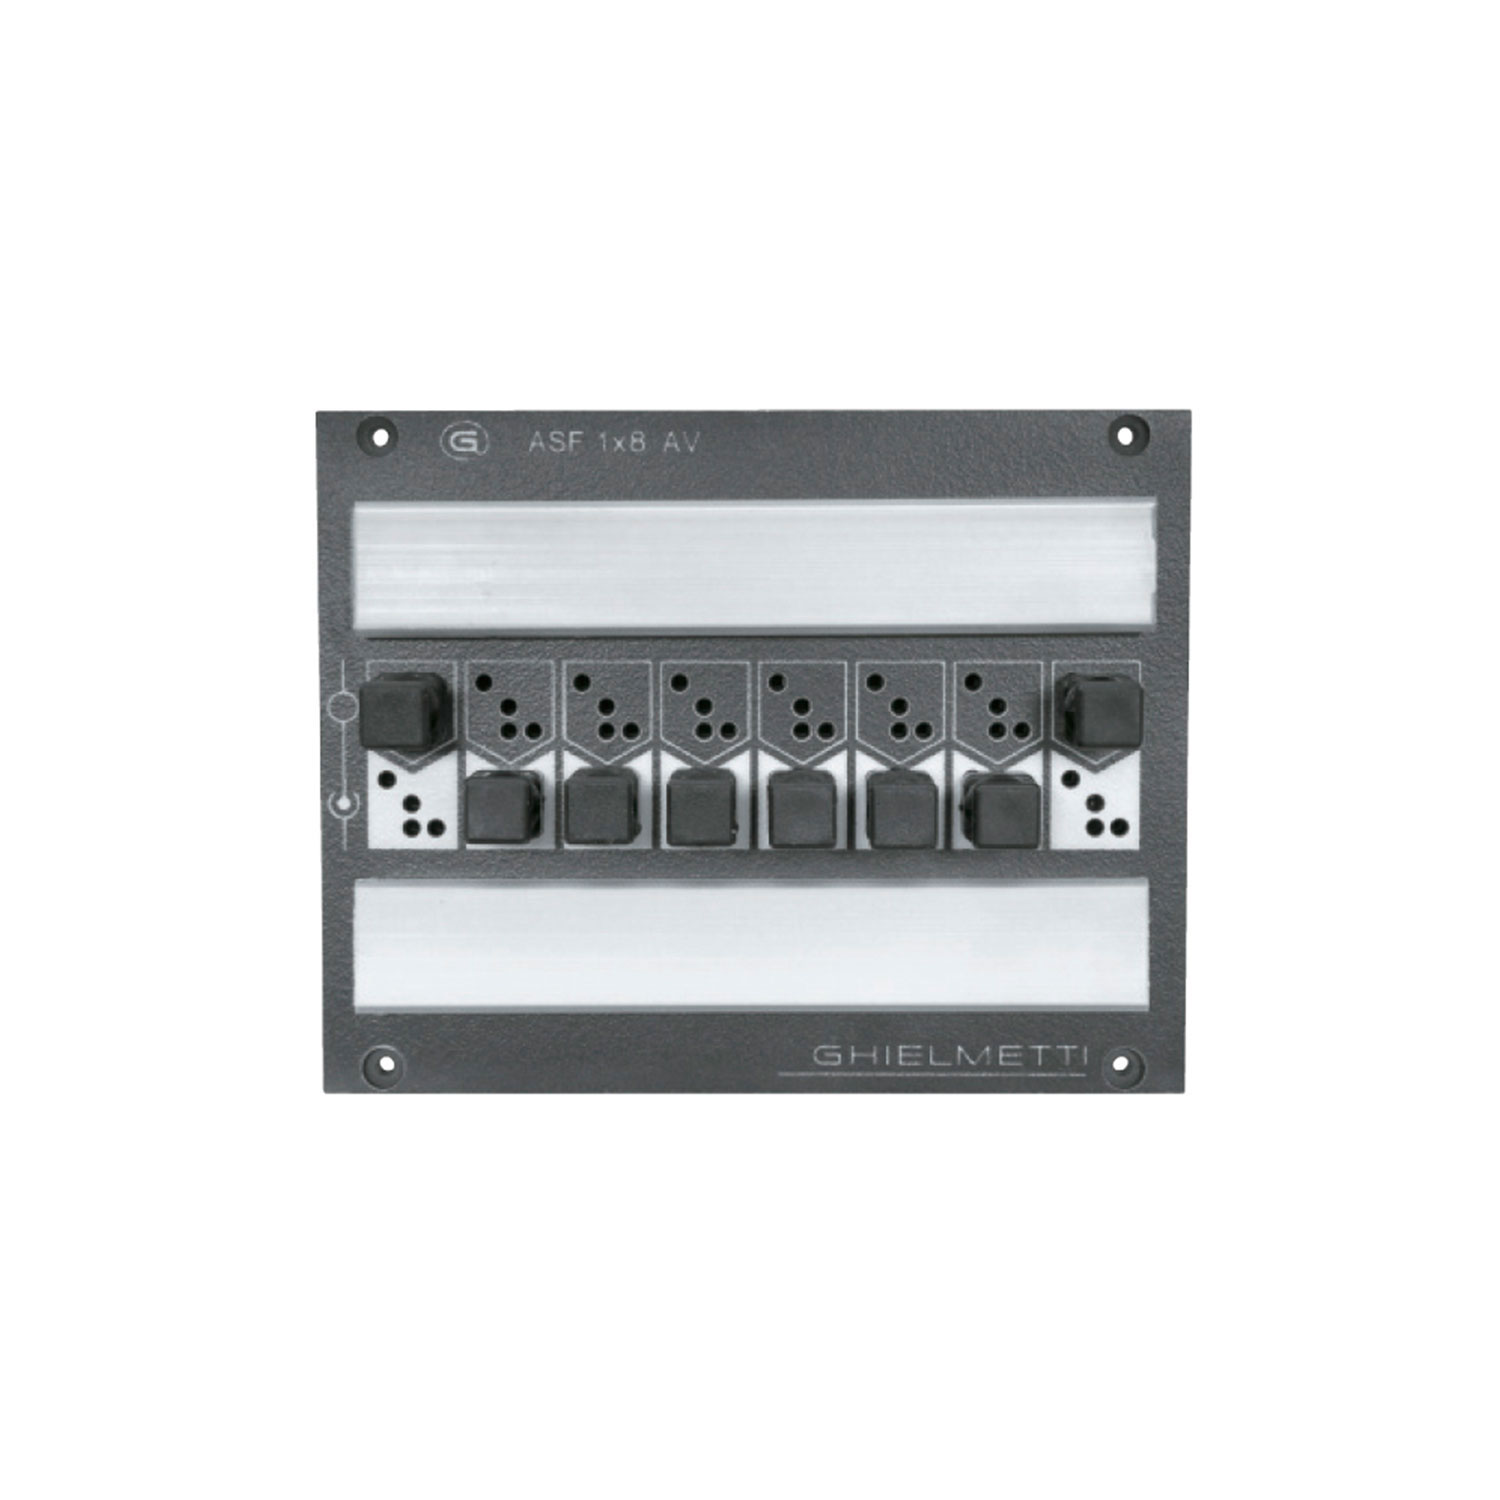 GHIELMETTI Switching patch panel AES / EBU, 8 channel, 19"/4 , 2 HE, 3 BE for SYSBOXX; incl. 8 connectors 3-pin + 8 soldered connectors GAS323LAC, 5mm layered laminate, colour: grey